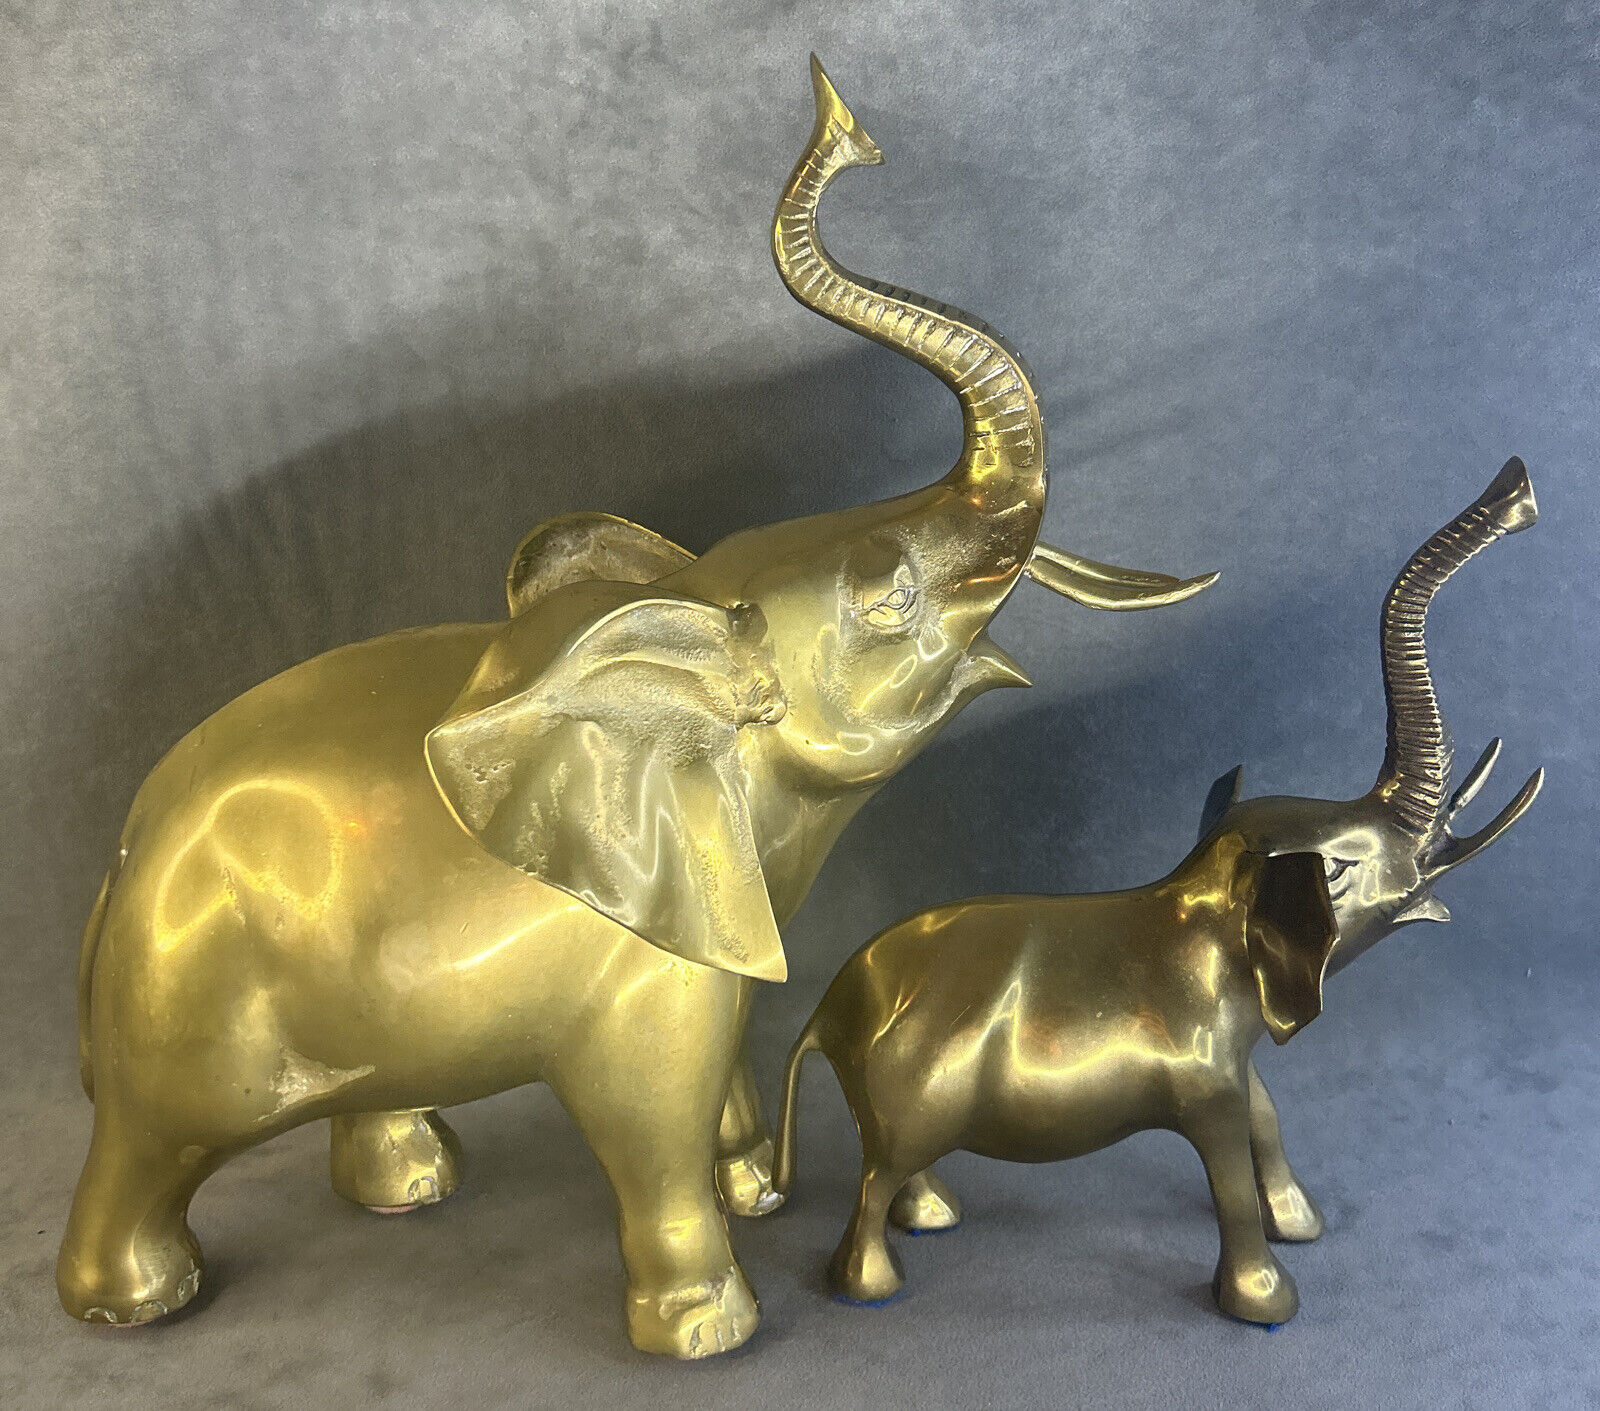 Pair Of Vintage 13.5” And 9.5” Brass Elephant Sculptures